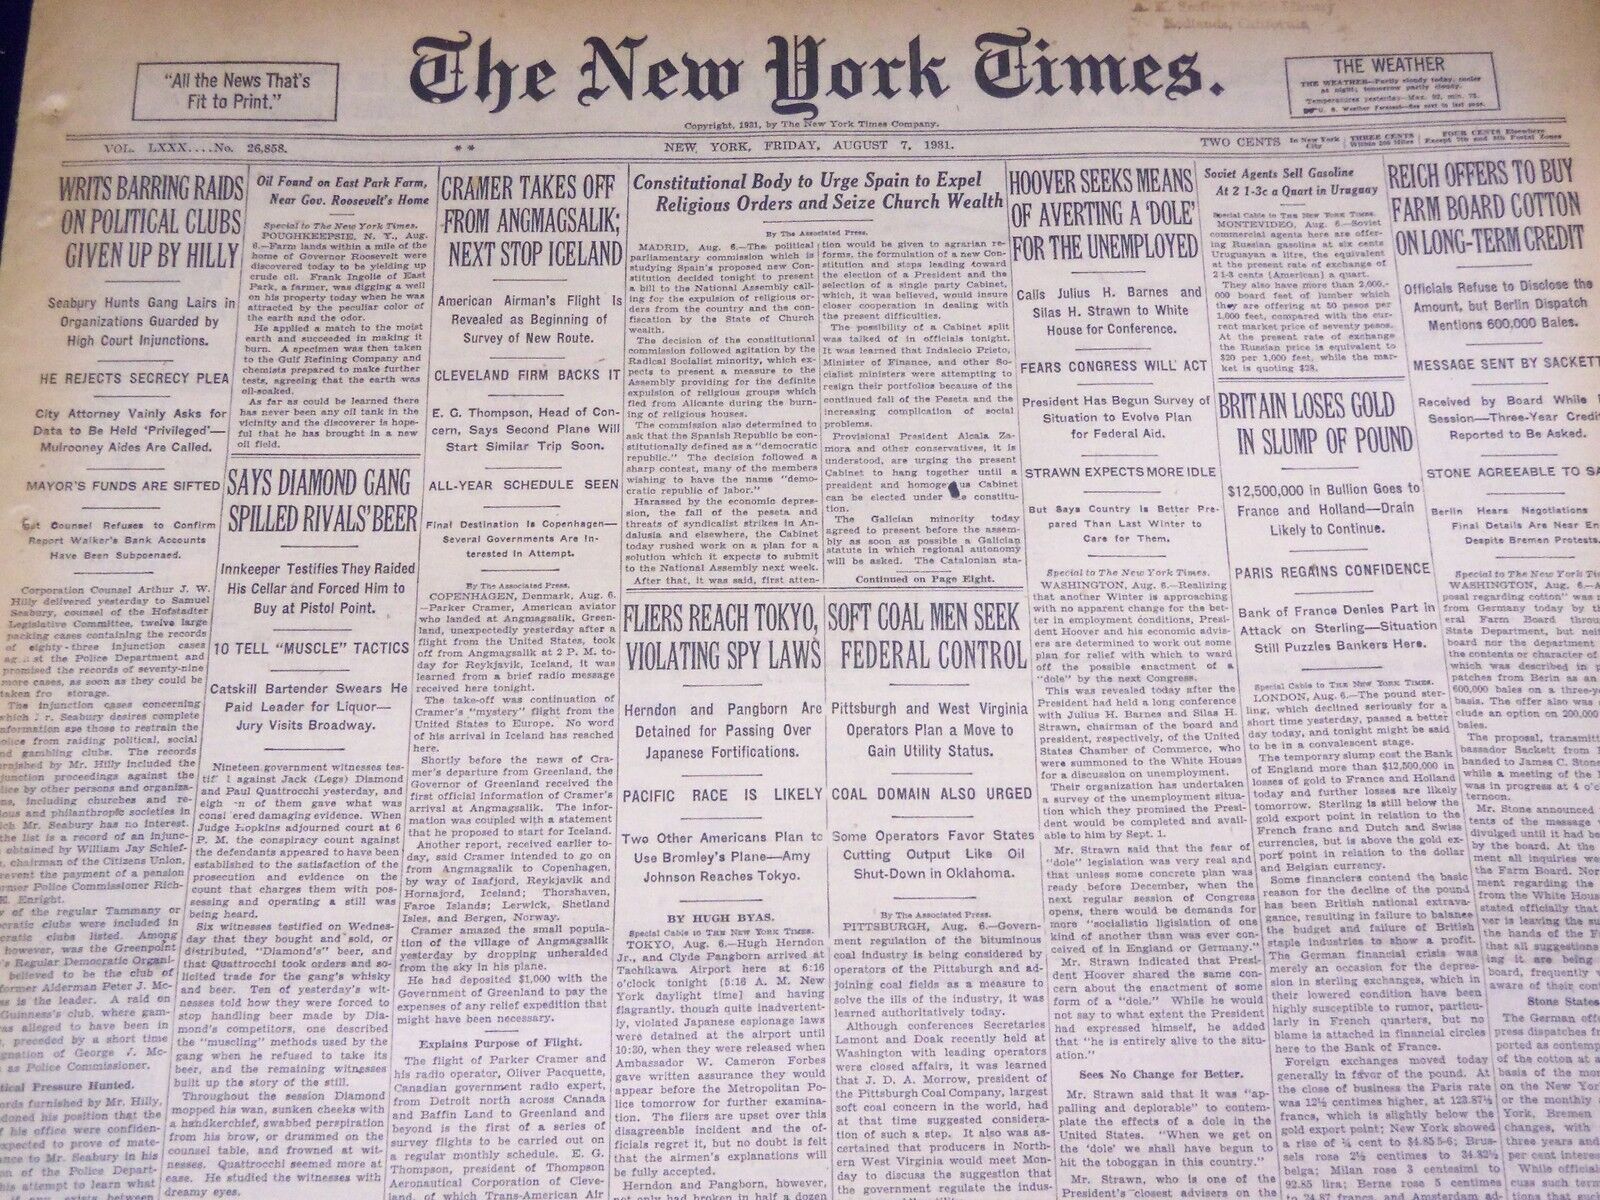 1931 AUGUST 7 NEW YORK TIMES - HERNDON AND PANGBORN REACH TOKYO - NT 3927